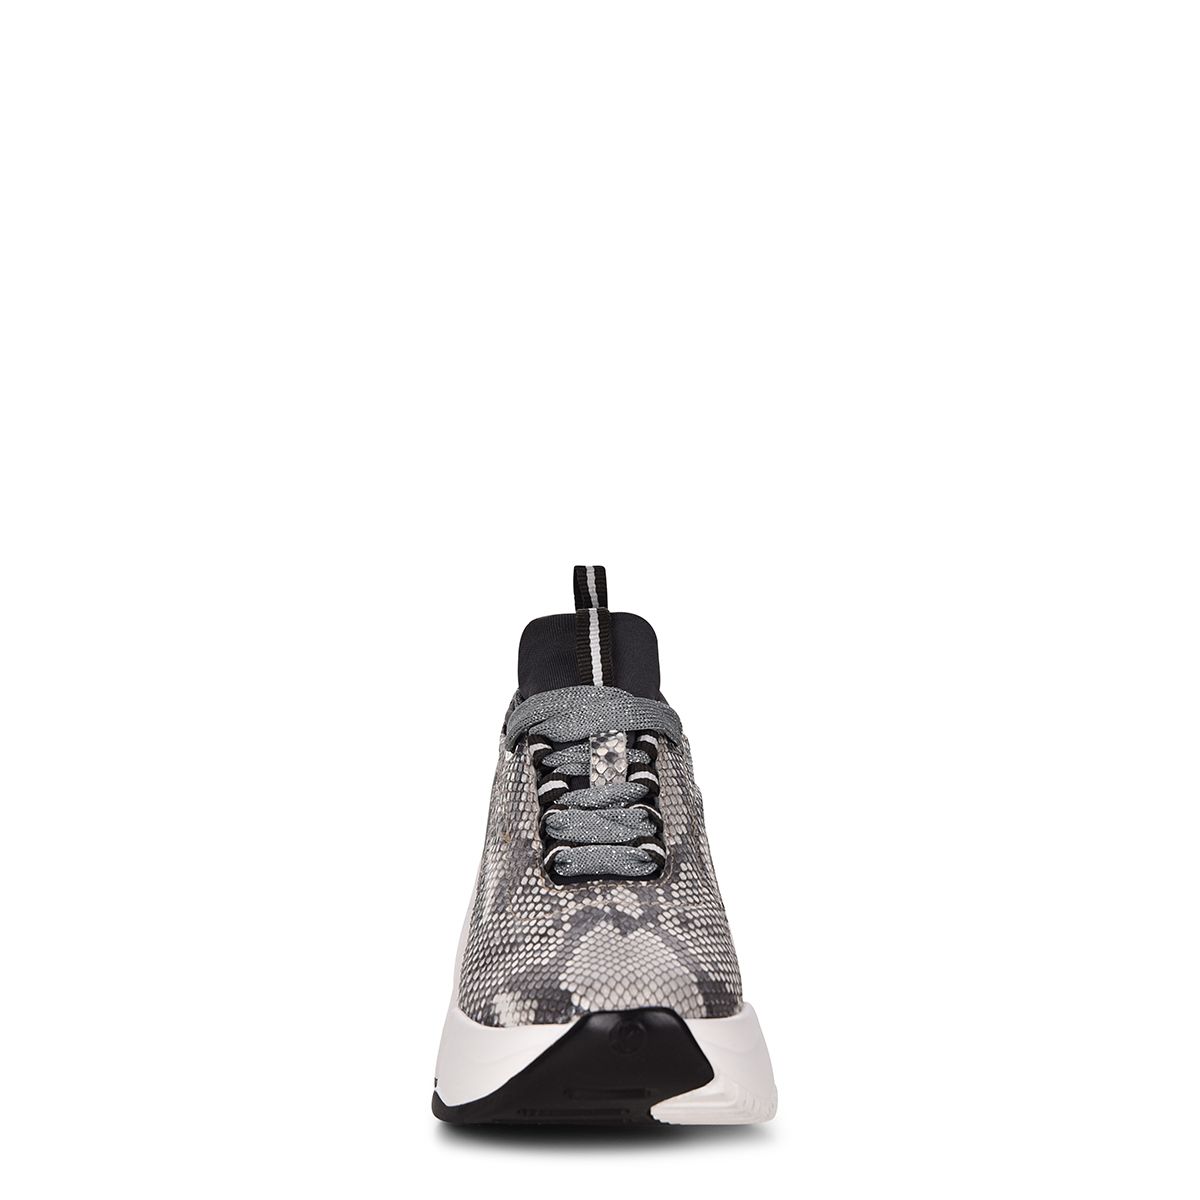 The lace-up design provides a customizable fit, making it easy for you to adjust the sneakers to your liking. Sparkly grey laces